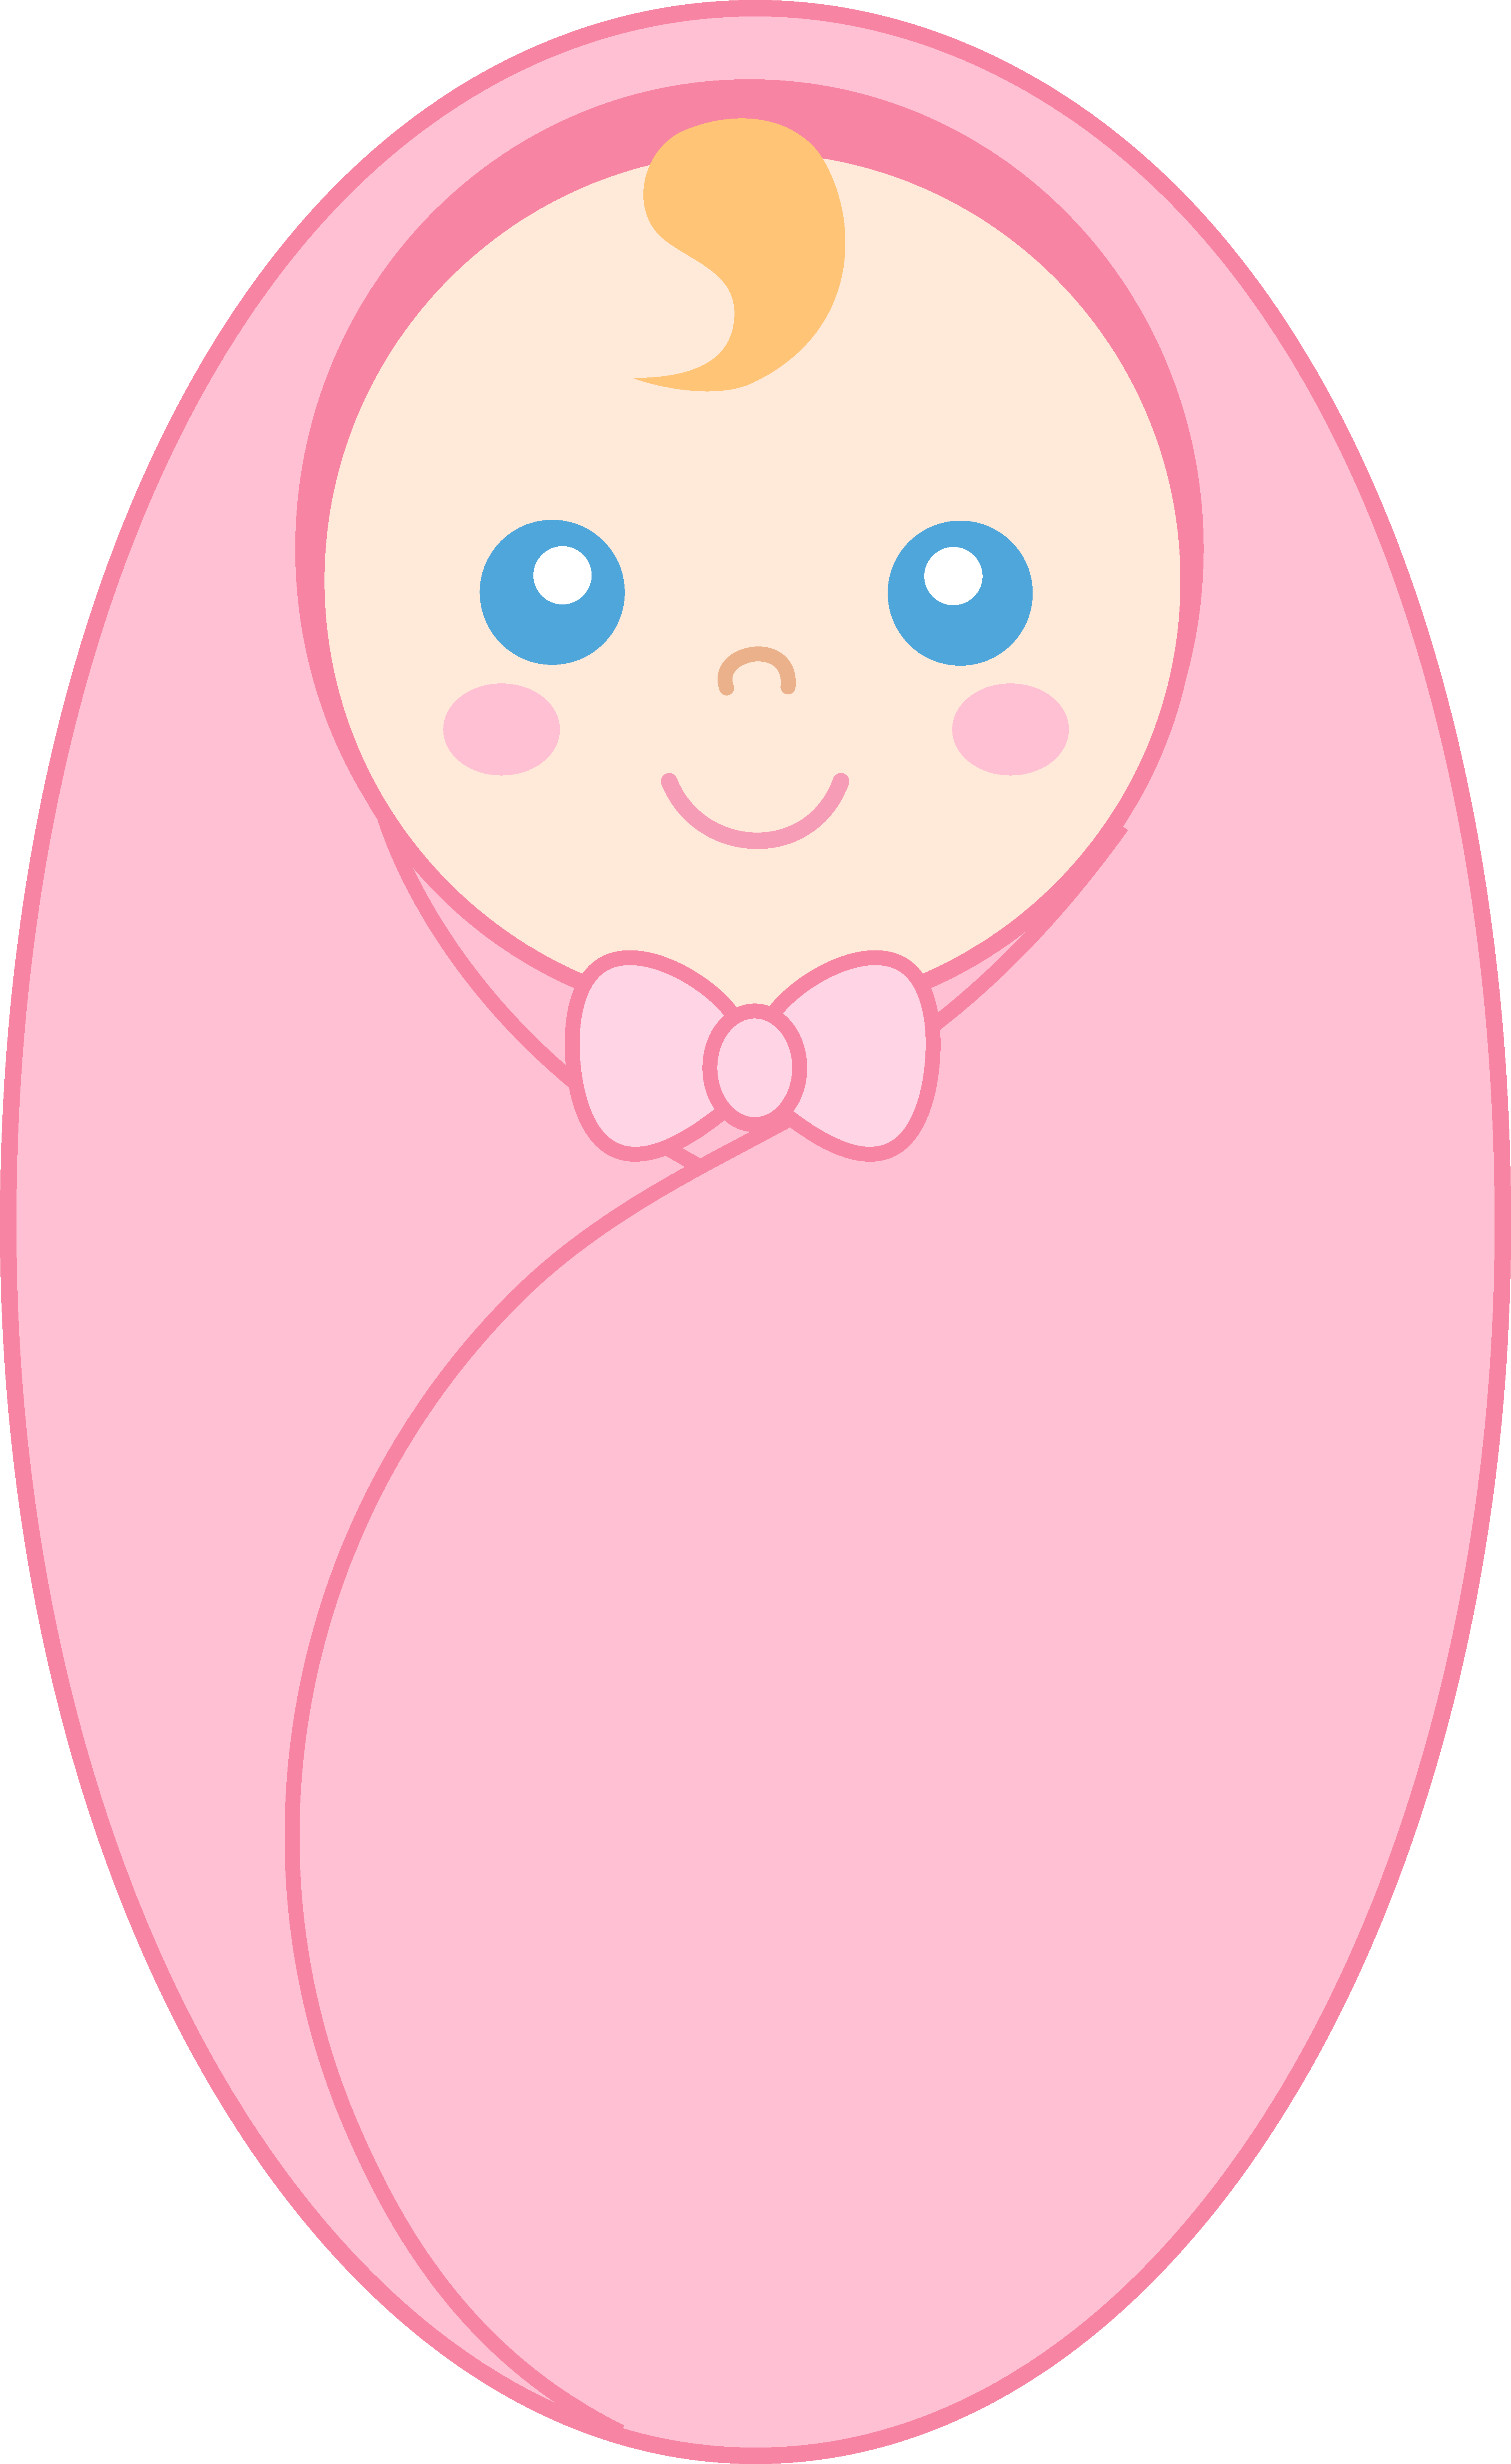 Clipart of a baby girl